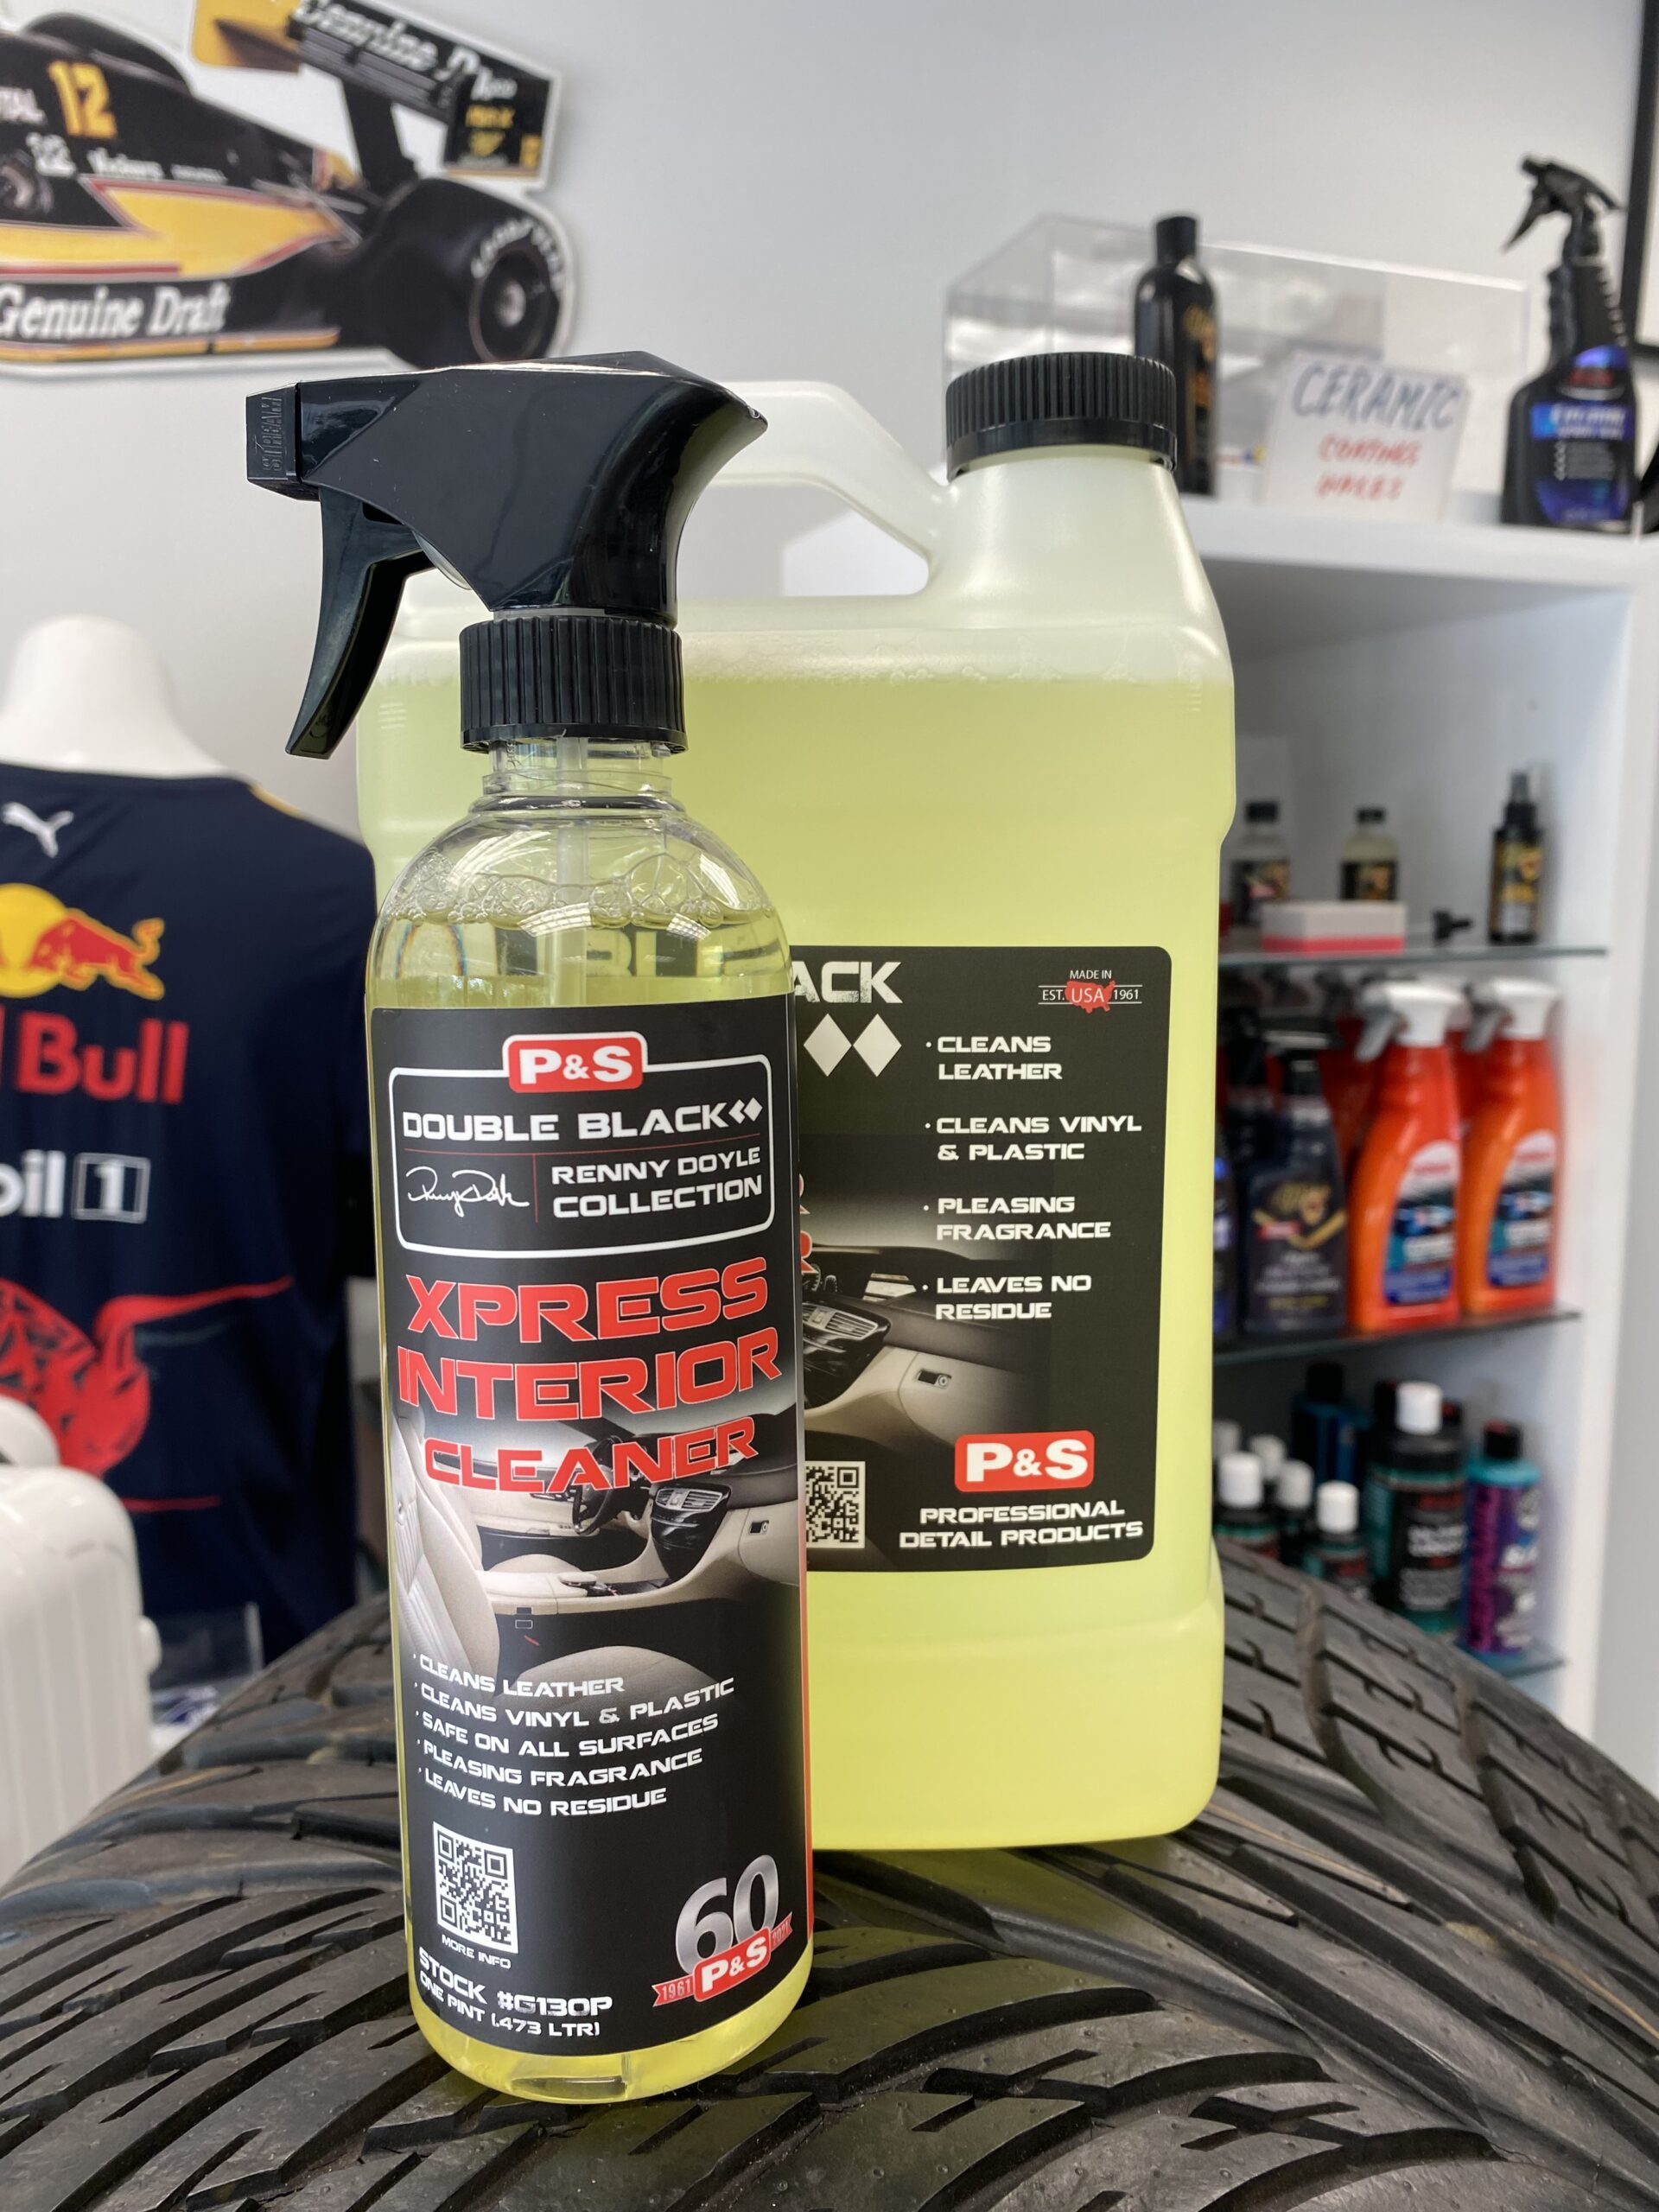  P&S Professional Detail Products - Xpress Interior Cleaner -  Perfect for Cleaning All Vehicle Interior Surfaces of Traffic Marks, Dirt,  Grease, and Oil; Works on Leather, Vinyl, and Plastic (1 Quart) : Automotive